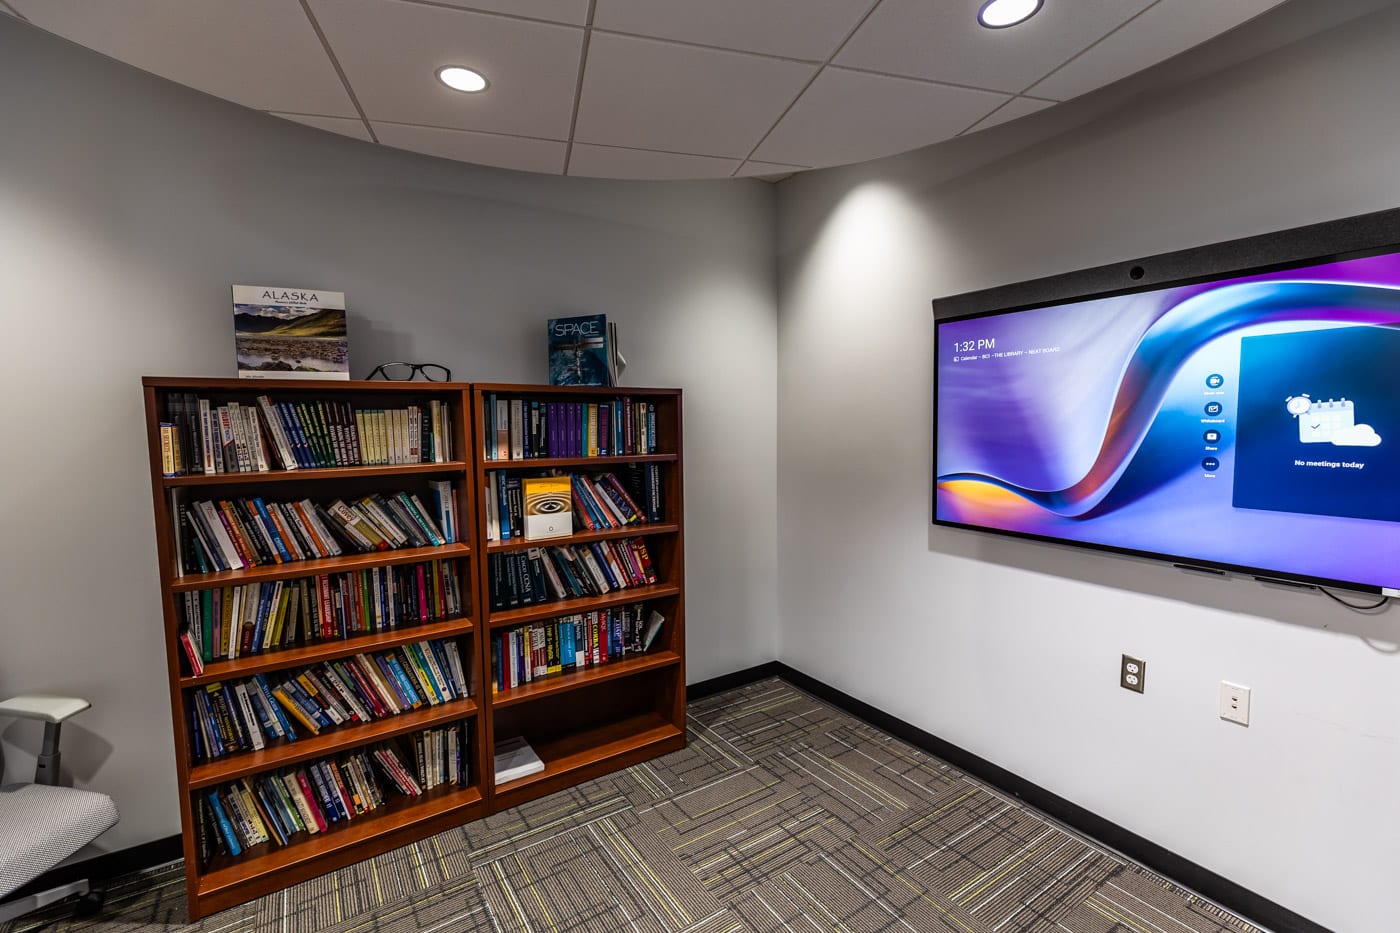 AOC office building room with books and TV